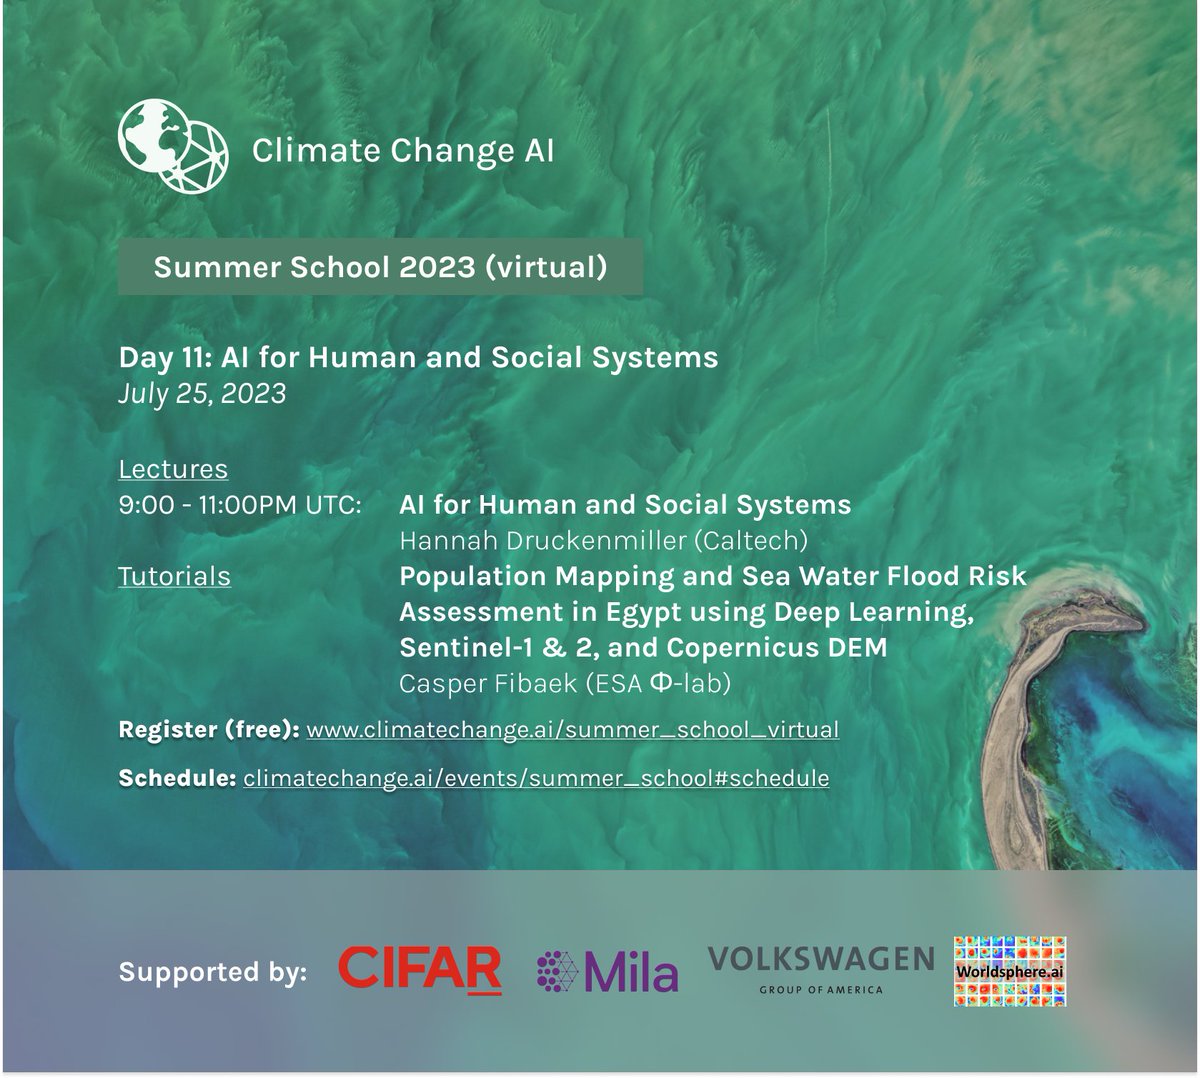 The penultimate day of the CCAI Summer School will feature a lecture on #AI for Human and Social Systems by @HannahDruck and will be followed by the release of a tutorial on “Population Mapping and Sea Water Flood Risk Assessment”.
🔗youtube.com/watch?v=FuvAXL…